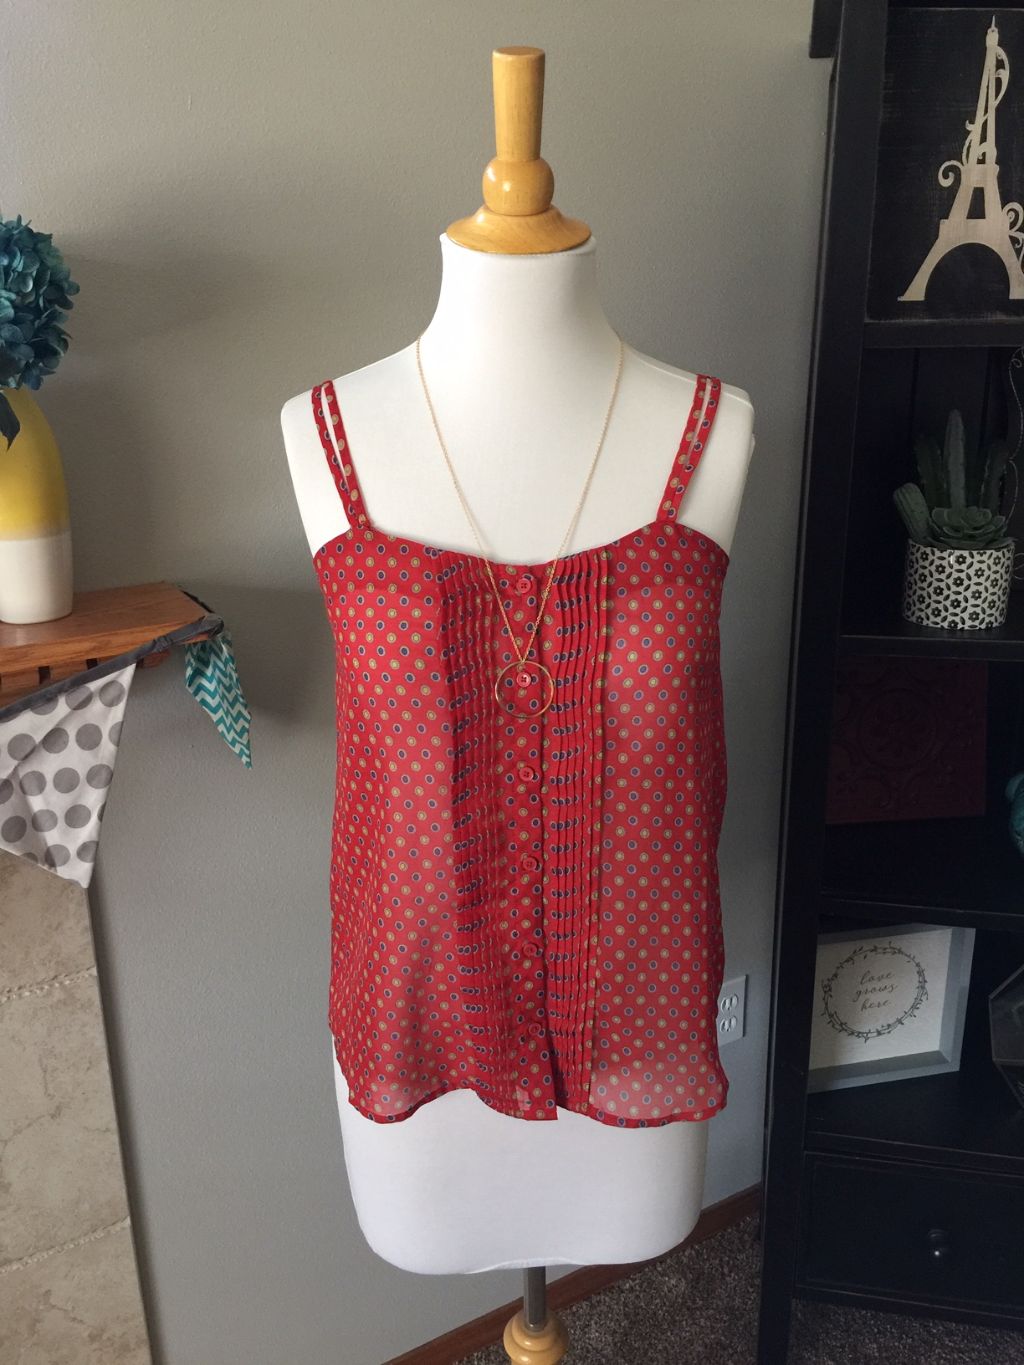 Pre-Loved Women's Mossimo Tank, S